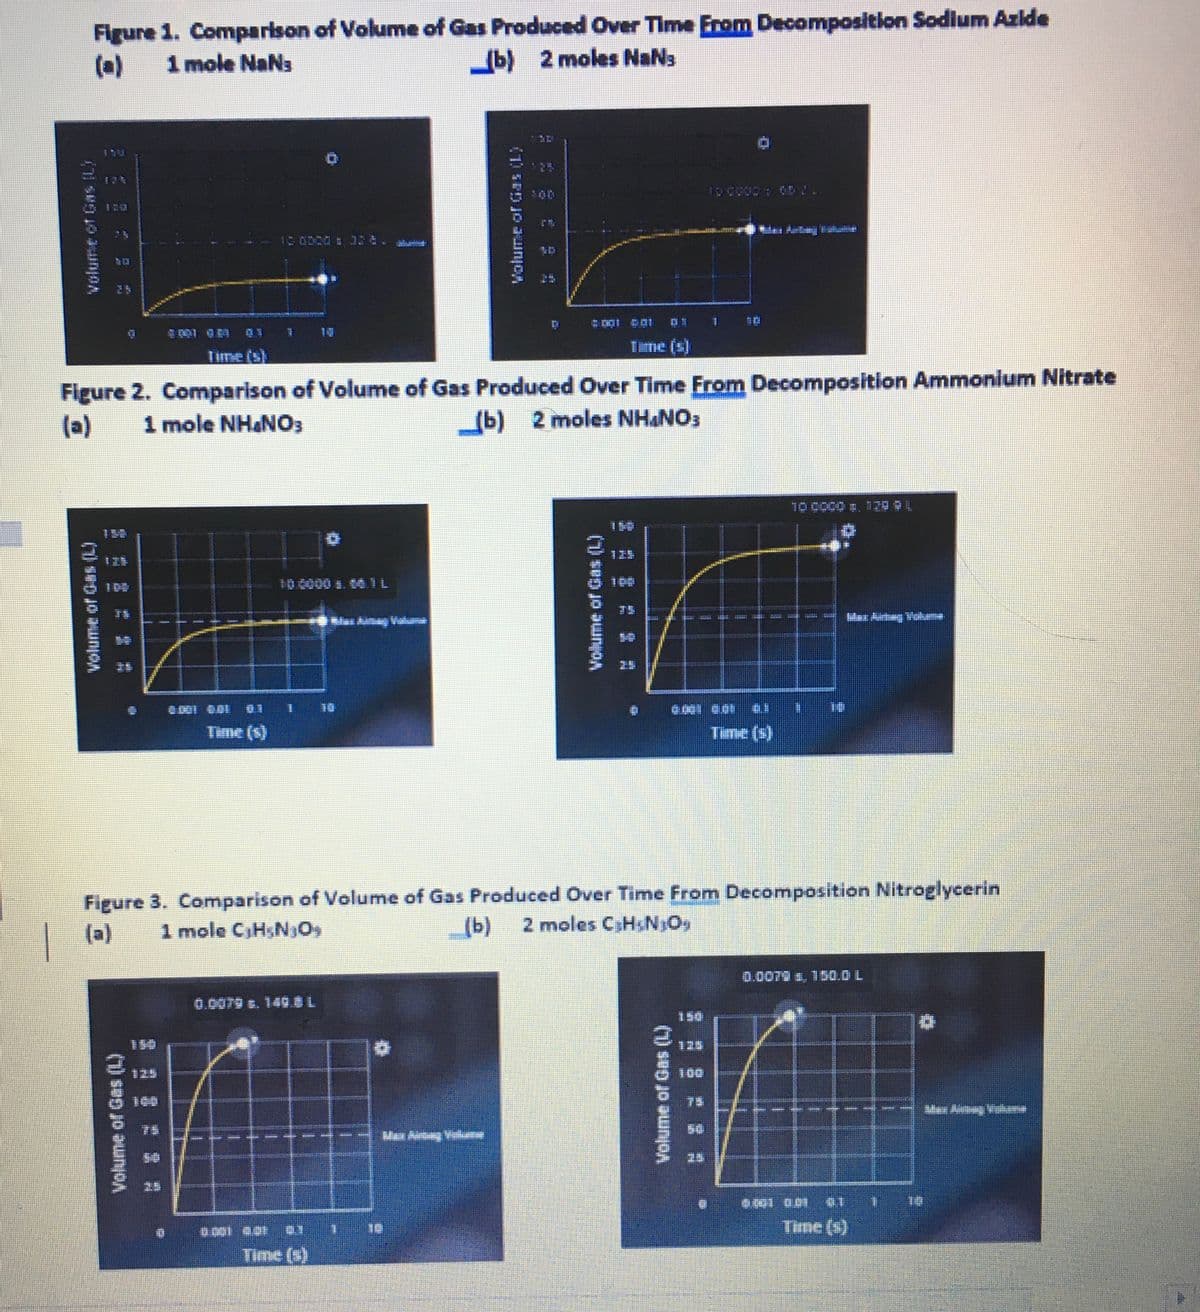 Figure 1. Comparison of Volume of Gas Produced Over Time From Decomposition Sodium Azide
(b) 2 moles NaN3
(-)
1 mole NaNs
Figure 2. Comparison of Volume of Gas Produced Over Time From Decomposition Ammonium Nitrate
1 mole NH.NO3
(b) 2 moles NH4NO3
Time (s)
Figure 3. Comparison of Volume of Gas Produced Over Time From Decomposition Nitroglycerin
1 mole C₂H5N₂O+
(b) 2 moles C H&NO
(7) seg jo awnjJOA
0.0079 s. 140.BL
1
401 49 41
Time (s)
Wan Abong Vaskem
(se jo njOJA.
Time (s)
1
Man Armag ficken